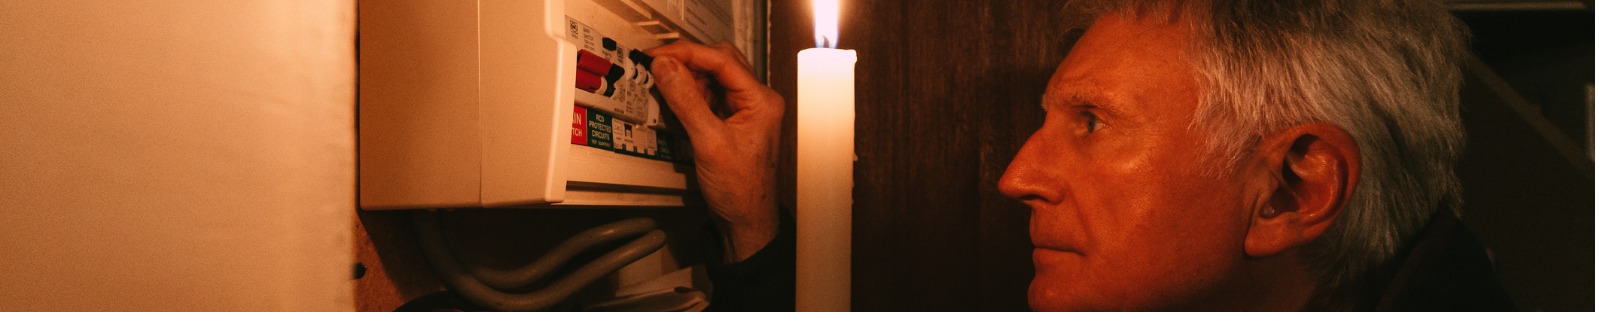 Senior man checking home fuse box by candlelight during power outage